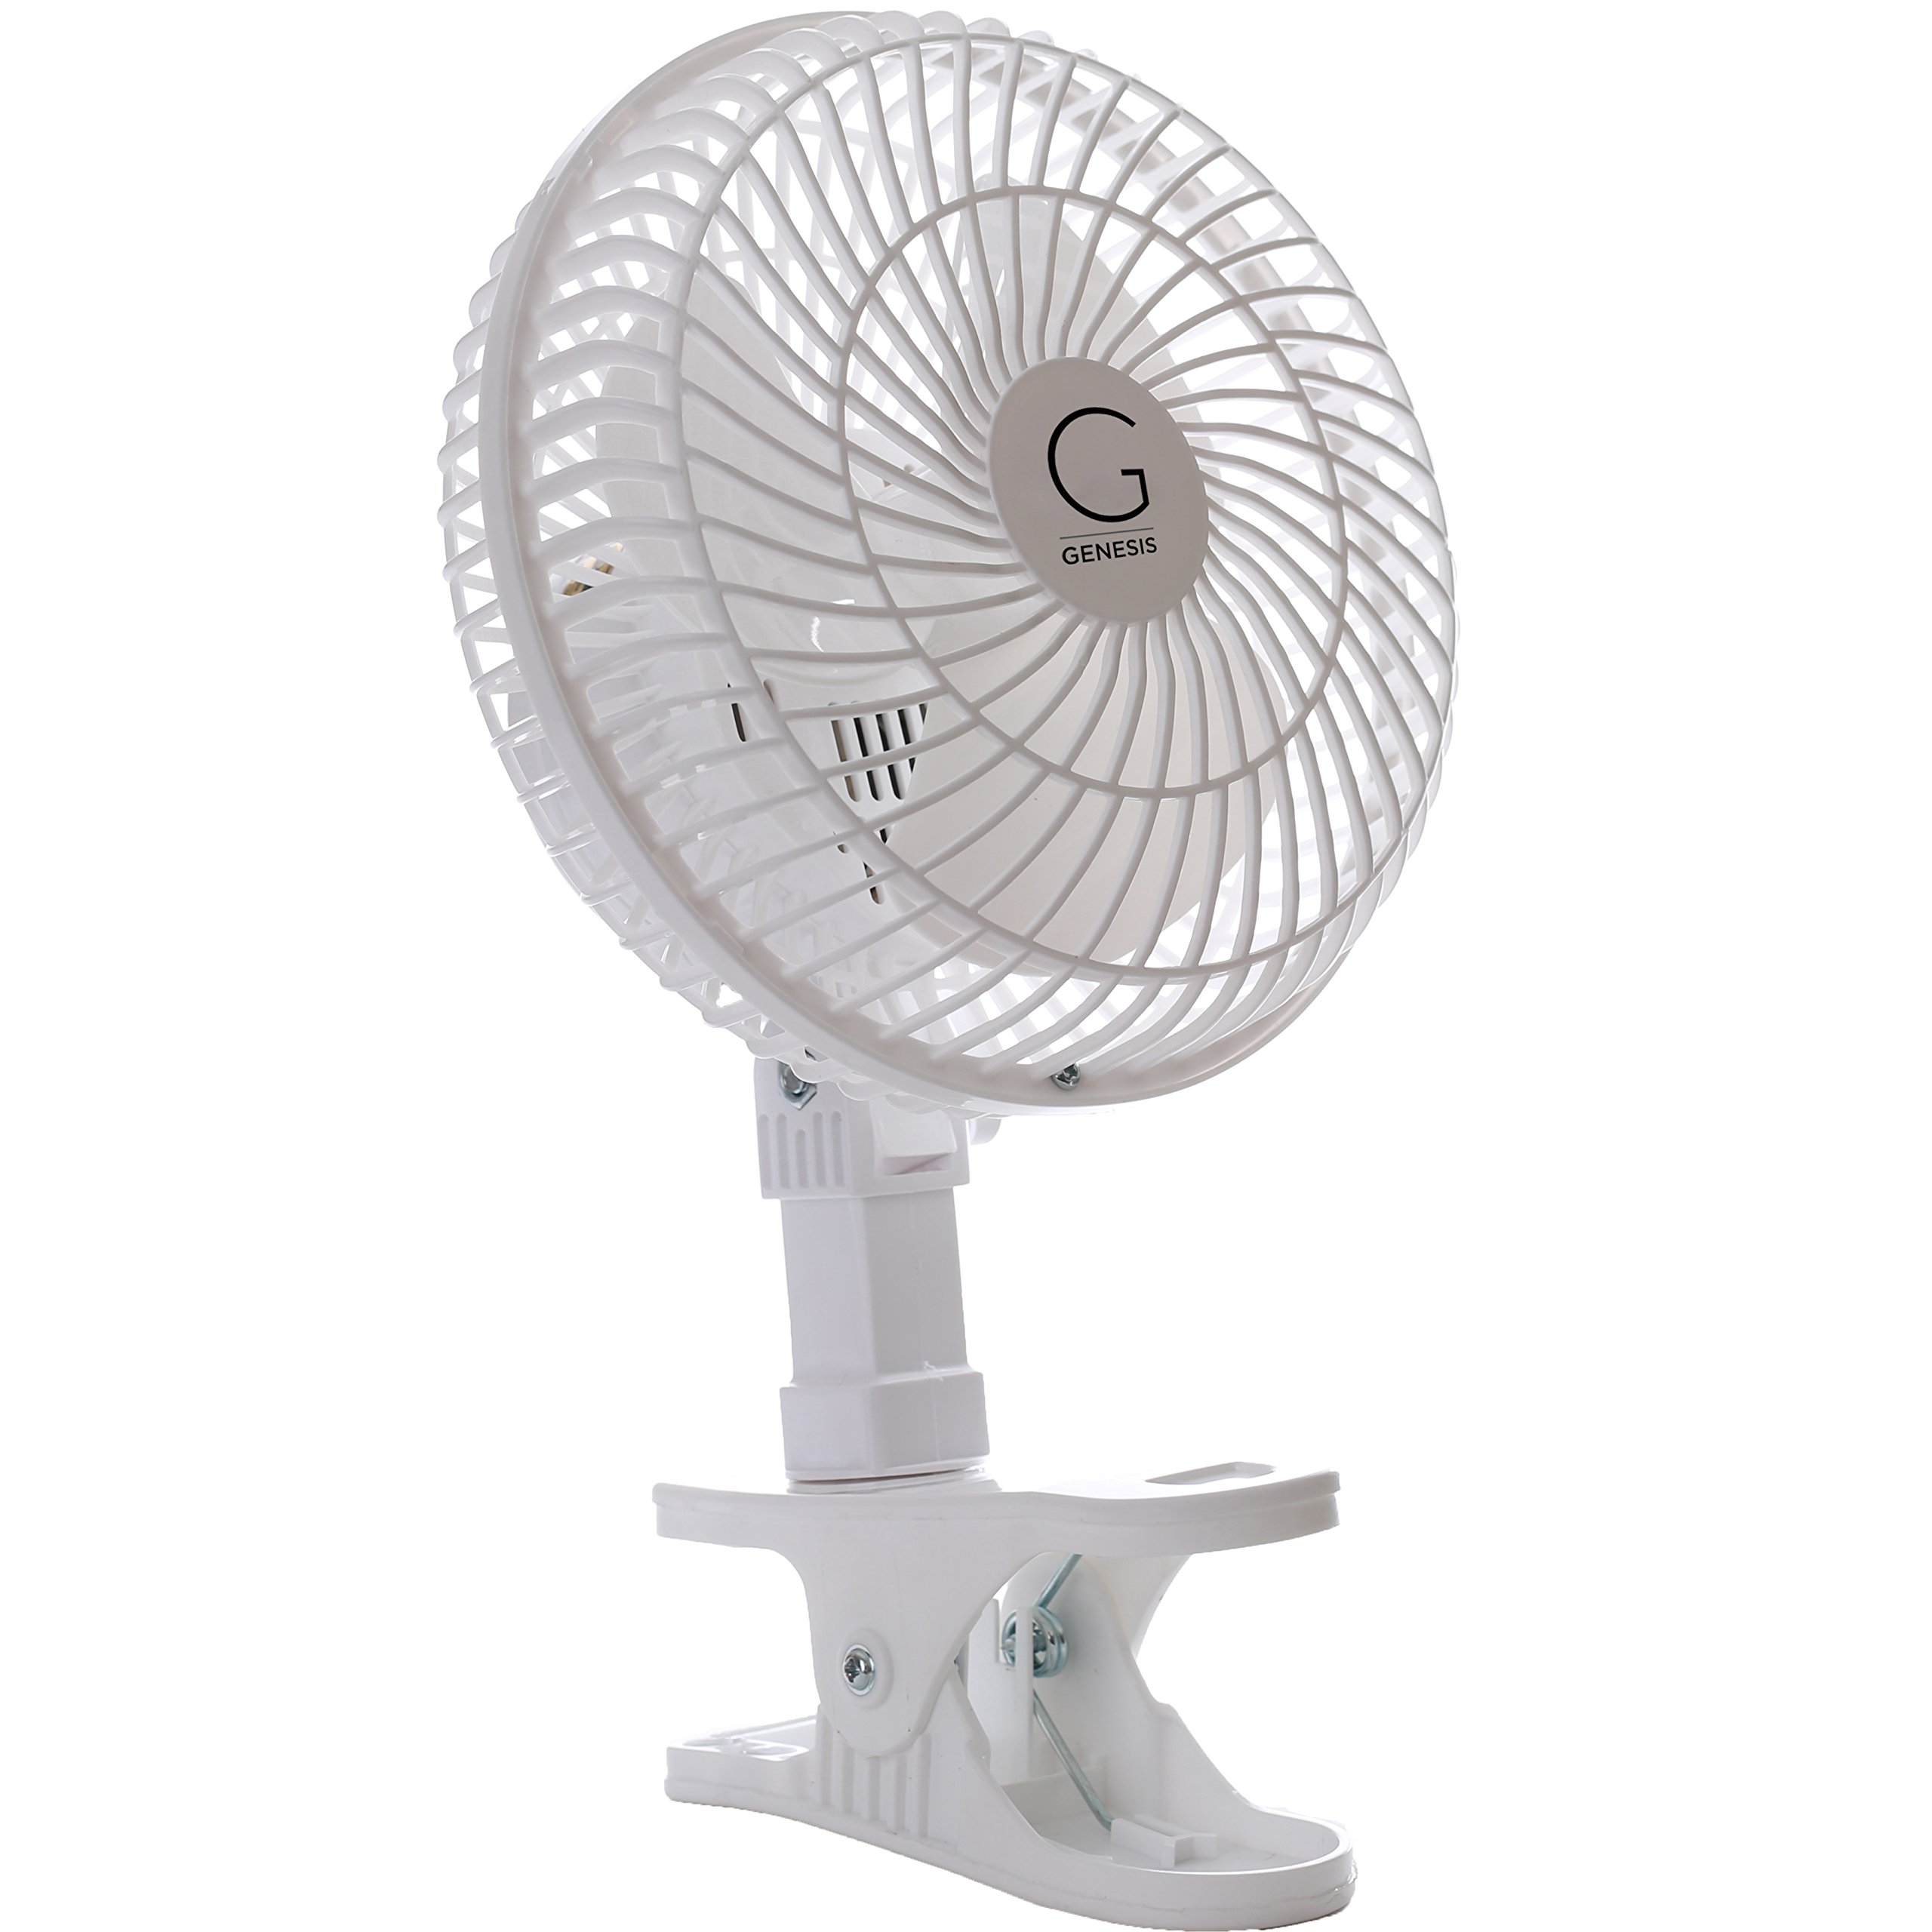 Genesis 6-Inch Clip Convertible Table-Top & Clip Fan Two Quiet Speeds - Ideal For The Home, Office, Dorm, More White